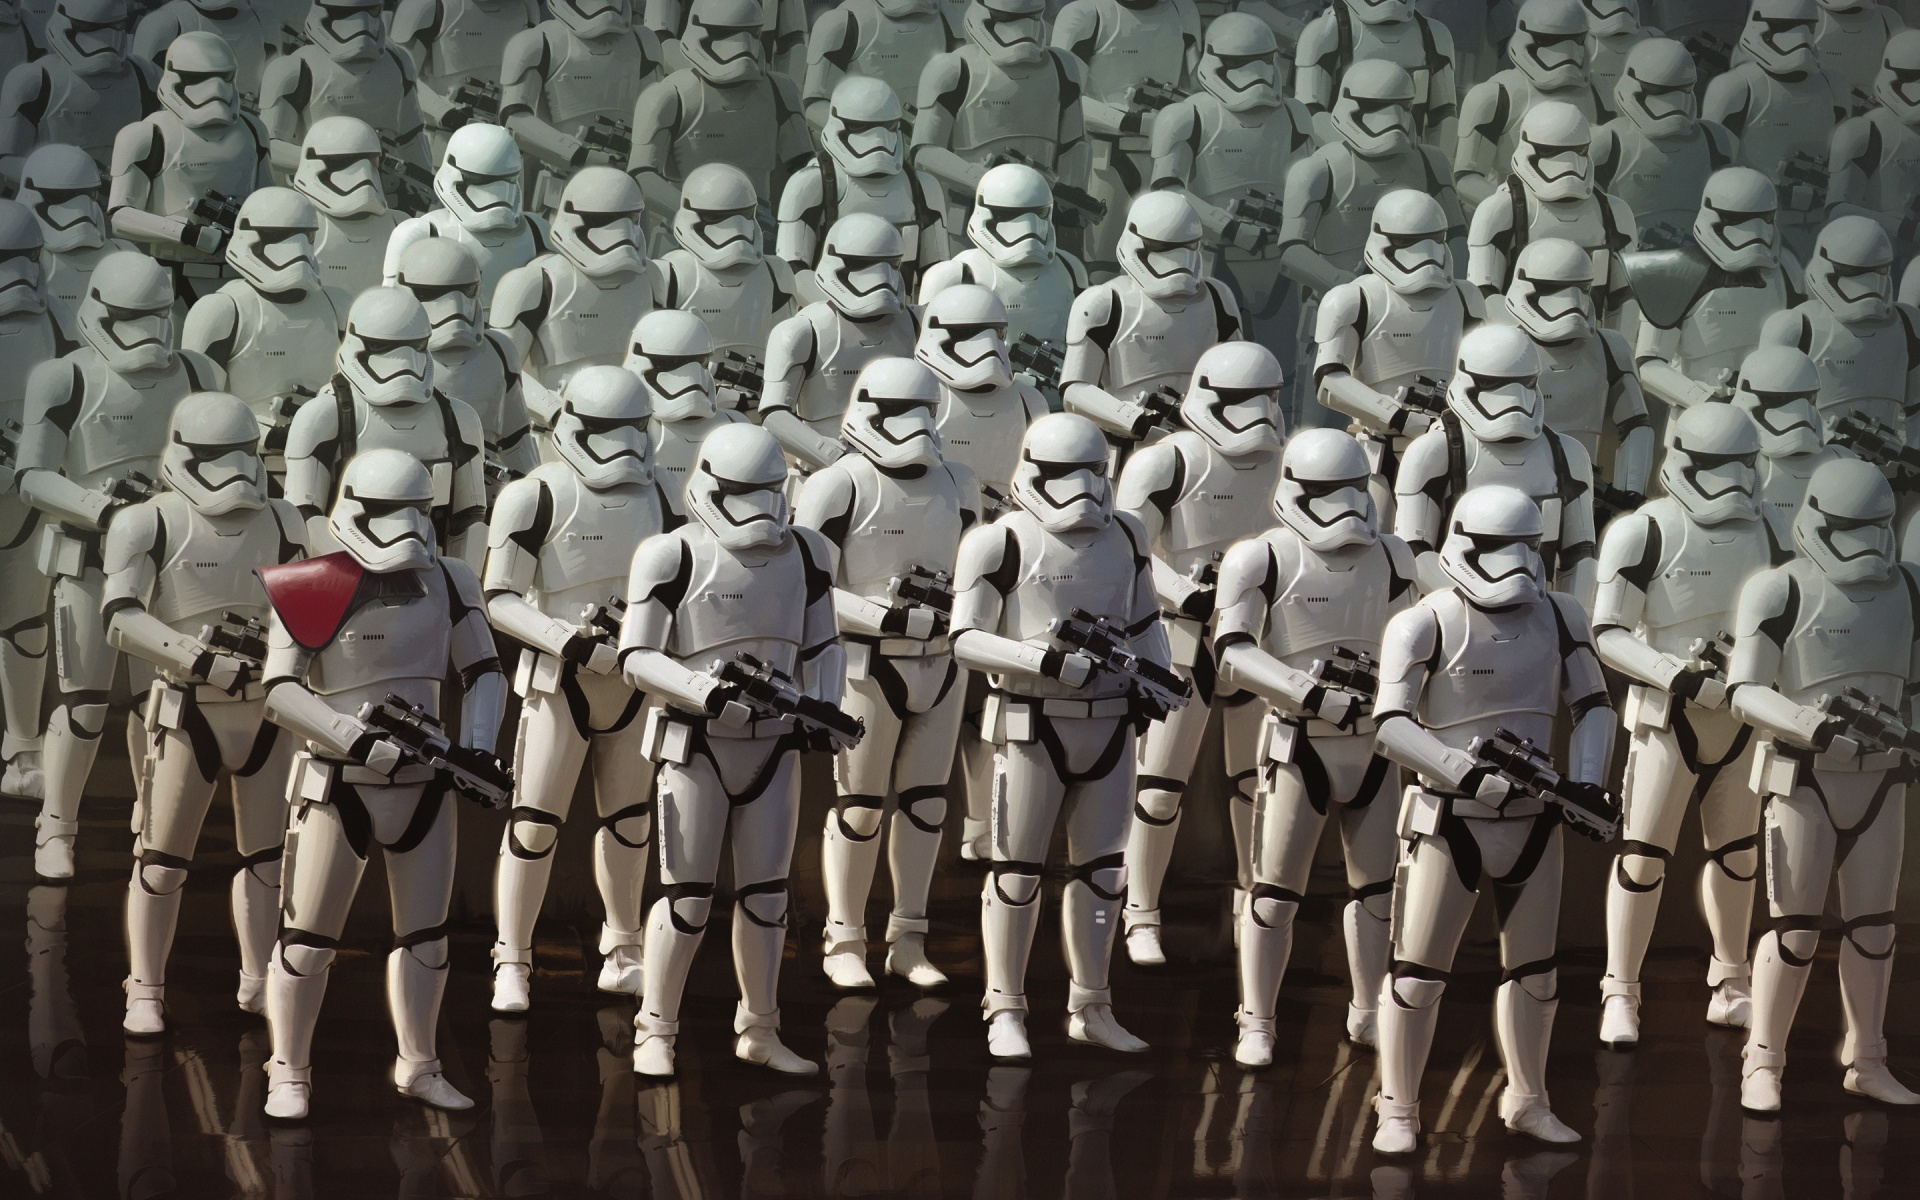 Star Wars The Force Awakens Stormtroopers Wallpapers HD Wallpapers